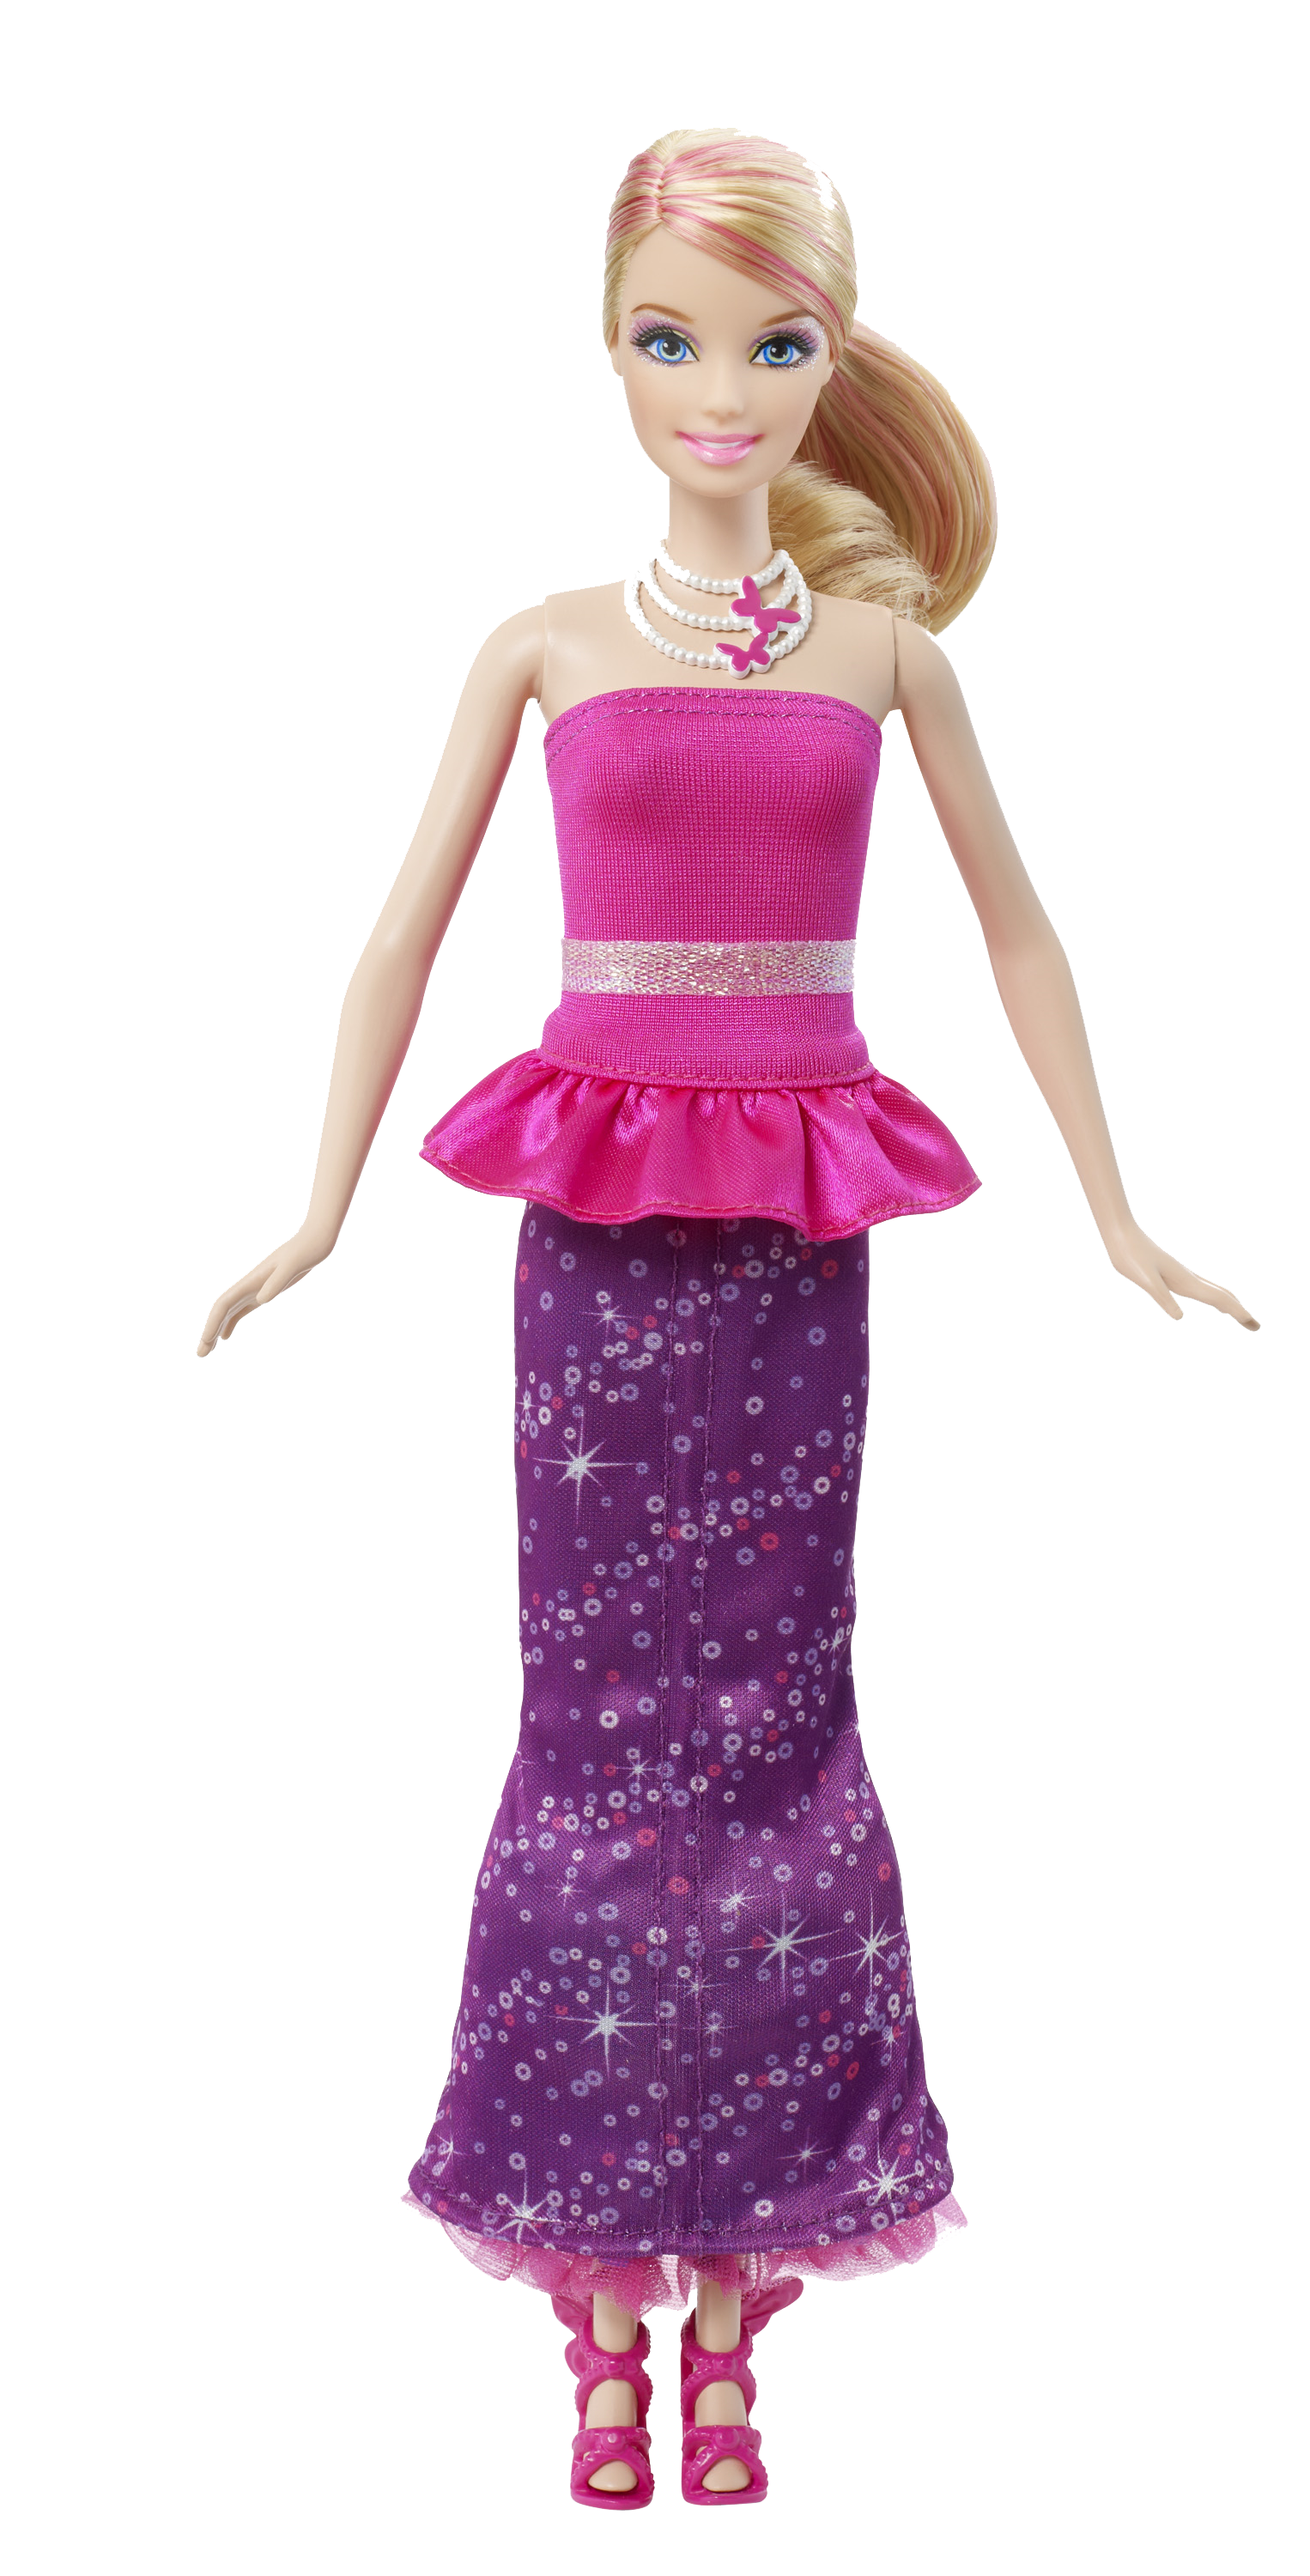 Barbie clipart transparent. Doll png images all